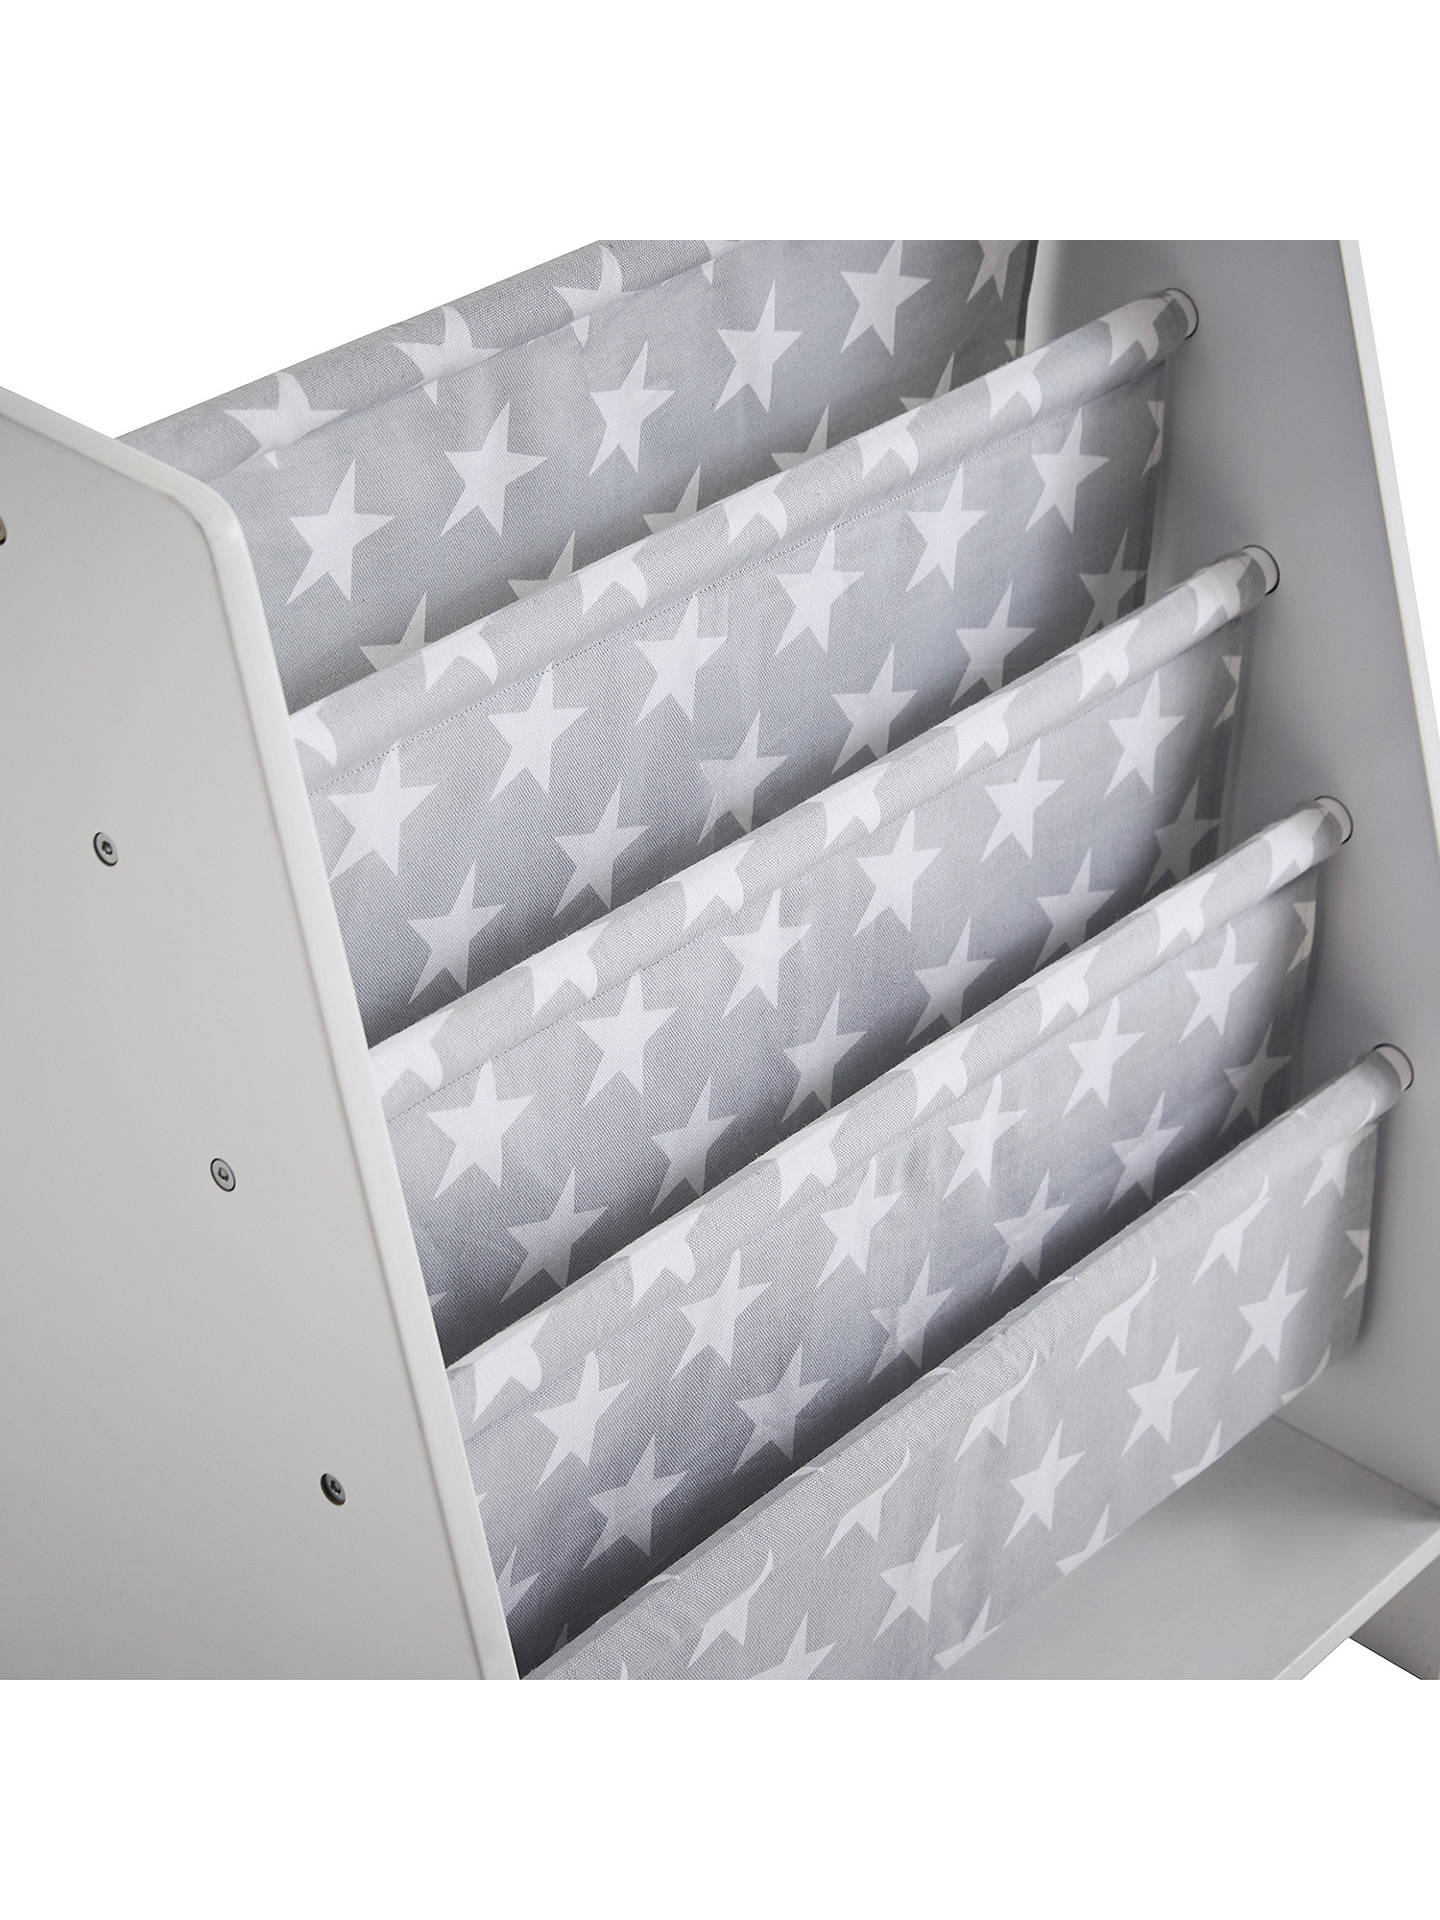 Great Little Trading Co Sling Bookcase Grey Star At John Lewis